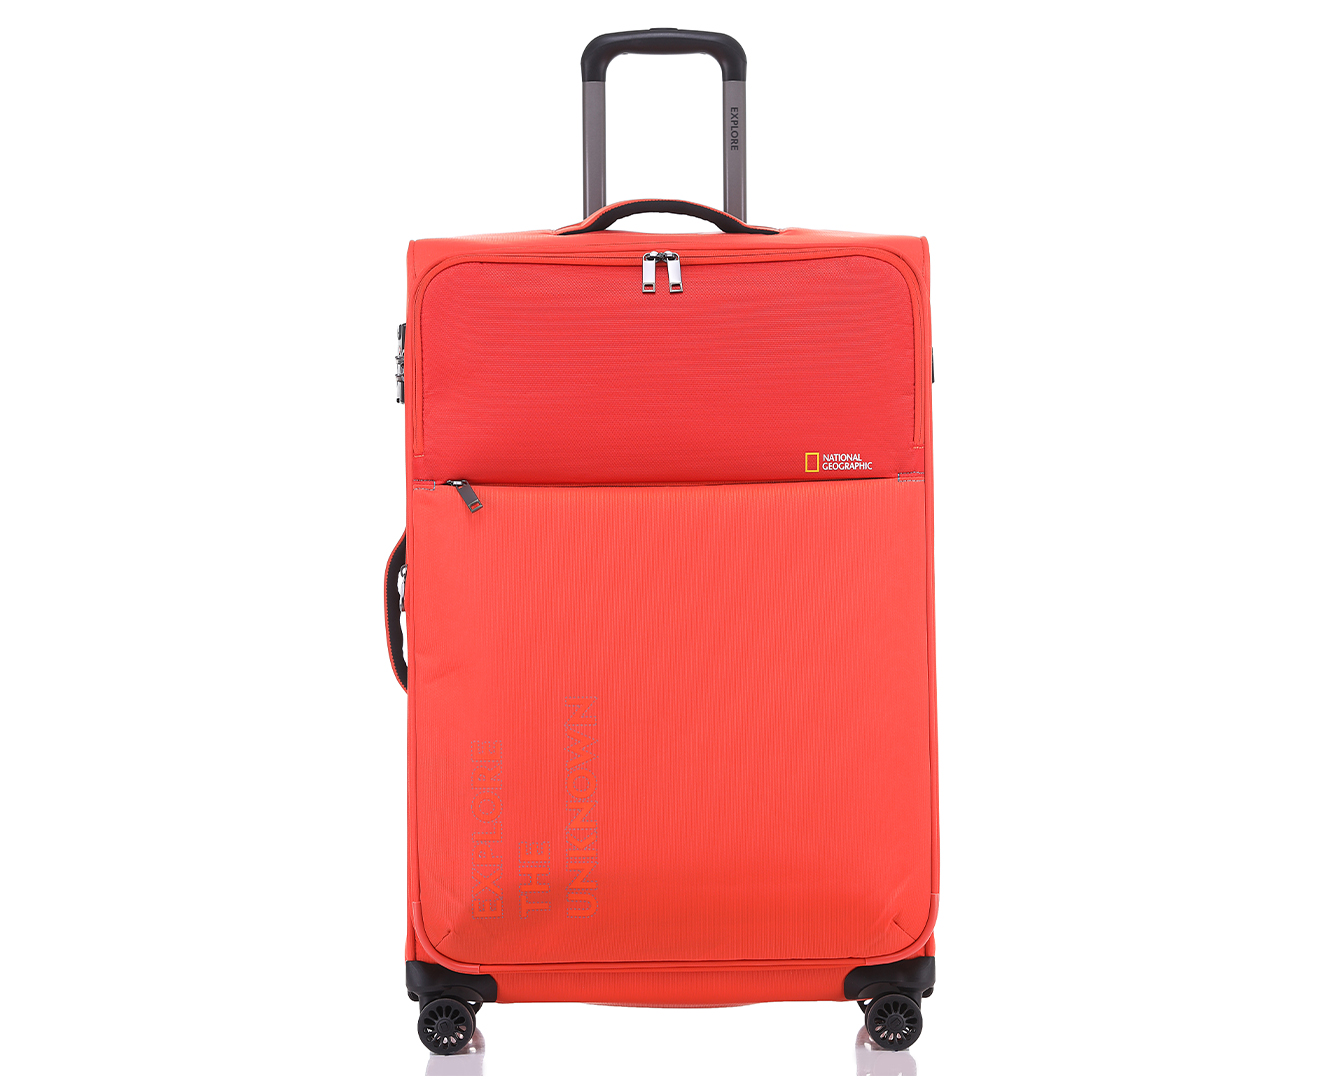 evolution travel goods suitcase review